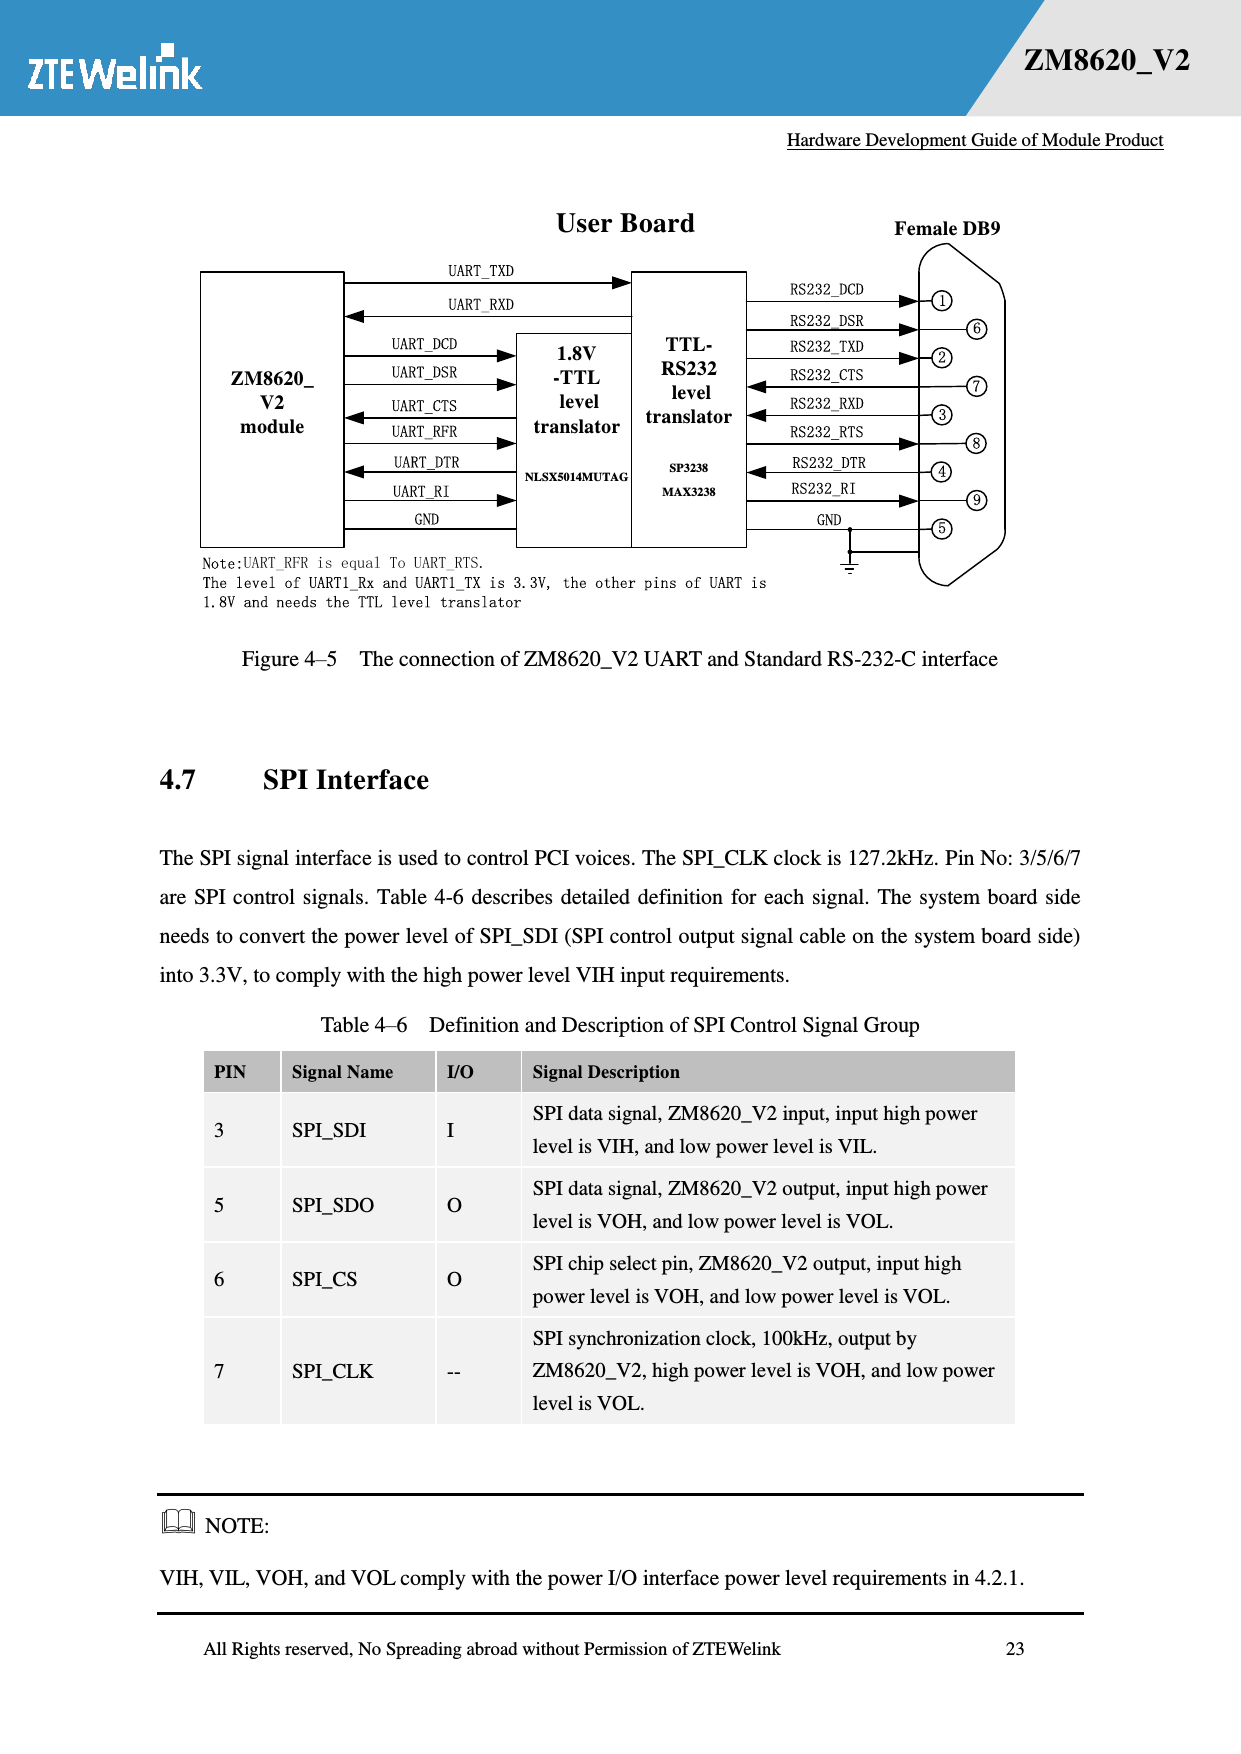   Hardware Development Guide of Module Product  All Rights reserved, No Spreading abroad without Permission of ZTEWelink              23 错误！未找到用源。    ZM8620_V2 TTL-RS232 level translator  SP3238 MAX3238ZM8620_V2module1.8V-TTL level translator NLSX5014MUTAGUART_DCDUART_DSRUART_CTSUART_RFRUART_DTRUART_RIGNDRS232_DCDRS232_DSRRS232_TXDRS232_CTSRS232_RXDRS232_RTSRS232_DTRRS232_RIGND123456789User Board Female DB9Note:UART_RFR is equal To UART_RTS.The level of UART1_Rx and UART1_TX is 3.3V, the other pins of UART is 1.8V and needs the TTL level translatorUART_TXDUART_RXD Figure 4–5  The connection of ZM8620_V2 UART and Standard RS-232-C interface    4.7 SPI Interface The SPI signal interface is used to control PCI voices. The SPI_CLK clock is 127.2kHz. Pin No: 3/5/6/7 are SPI control signals. Table 4-6 describes detailed definition for each signal. The system board side needs to convert the power level of SPI_SDI (SPI control output signal cable on the system board side) into 3.3V, to comply with the high power level VIH input requirements.   Table 4–6  Definition and Description of SPI Control Signal Group PIN Signal Name I/O Signal Description   3 SPI_SDI I SPI data signal, ZM8620_V2 input, input high power level is VIH, and low power level is VIL. 5 SPI_SDO O SPI data signal, ZM8620_V2 output, input high power level is VOH, and low power level is VOL. 6 SPI_CS O SPI chip select pin, ZM8620_V2 output, input high power level is VOH, and low power level is VOL. 7 SPI_CLK -- SPI synchronization clock, 100kHz, output by ZM8620_V2, high power level is VOH, and low power level is VOL.   NOTE: VIH, VIL, VOH, and VOL comply with the power I/O interface power level requirements in 4.2.1. 